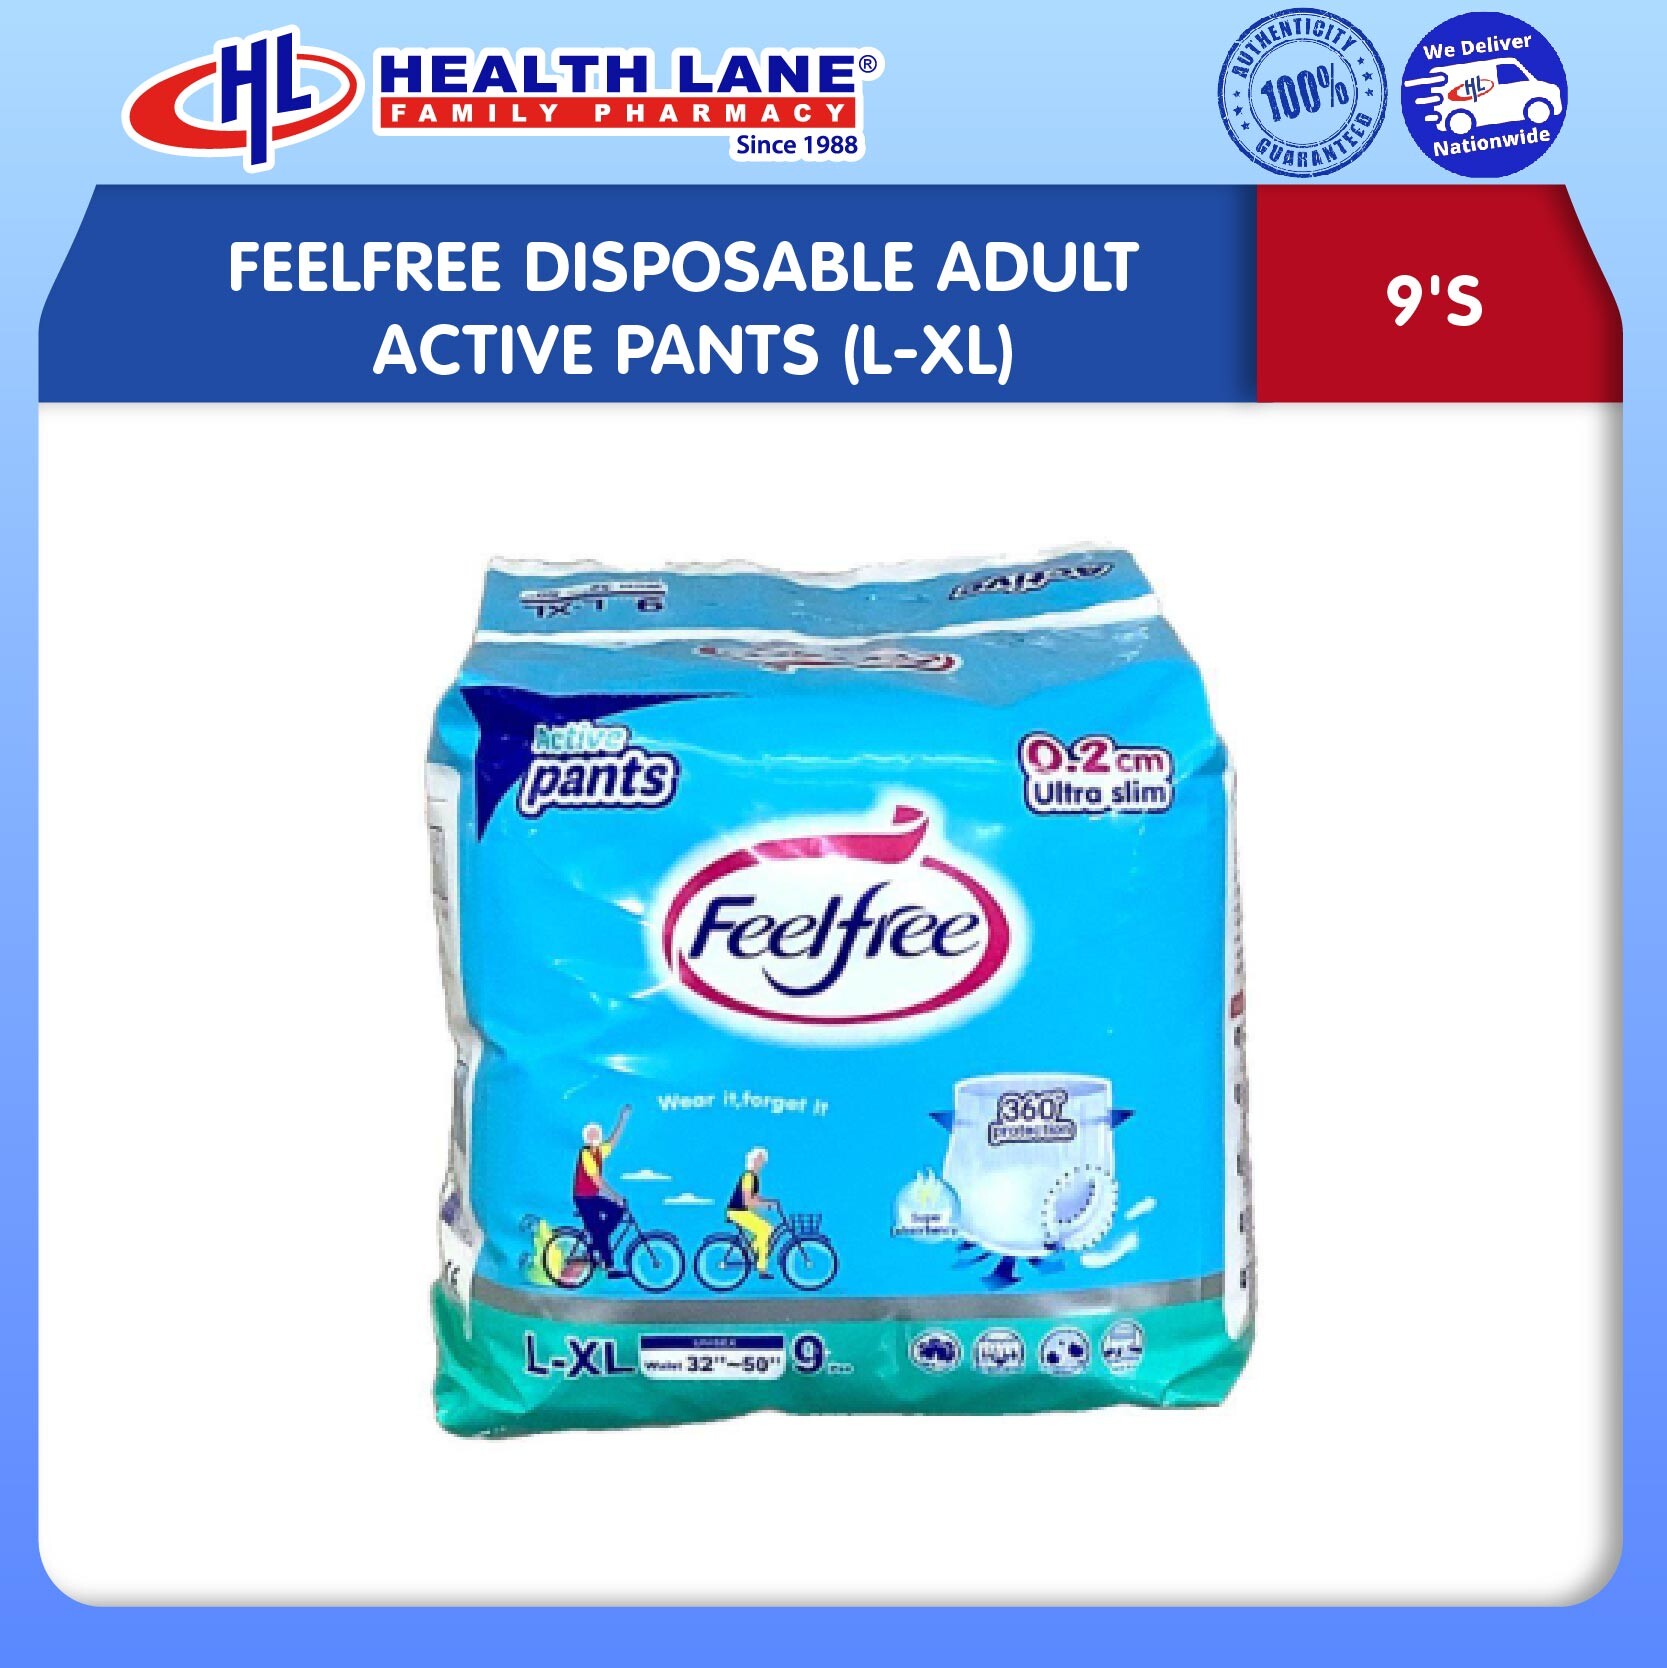 FEELFREE DISPOSABLE ADULT ACTIVE PANTS 9'S (L-XL)